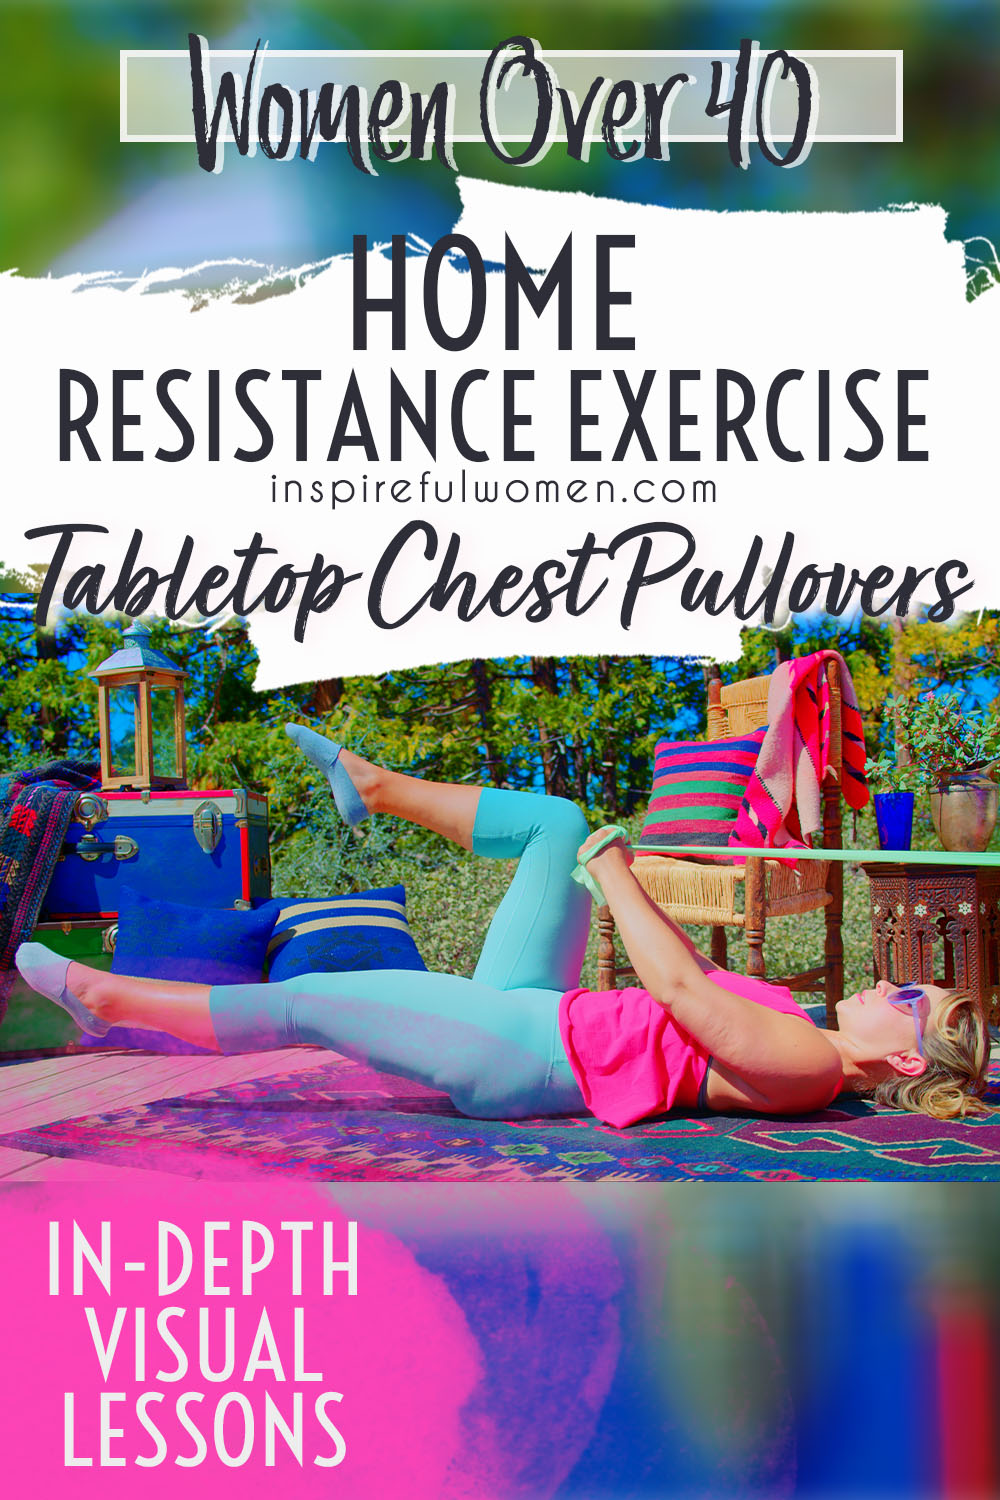 tabletop-chest-pullovers-floor-banded-pec-lats-triceps-exercise-women-over-40